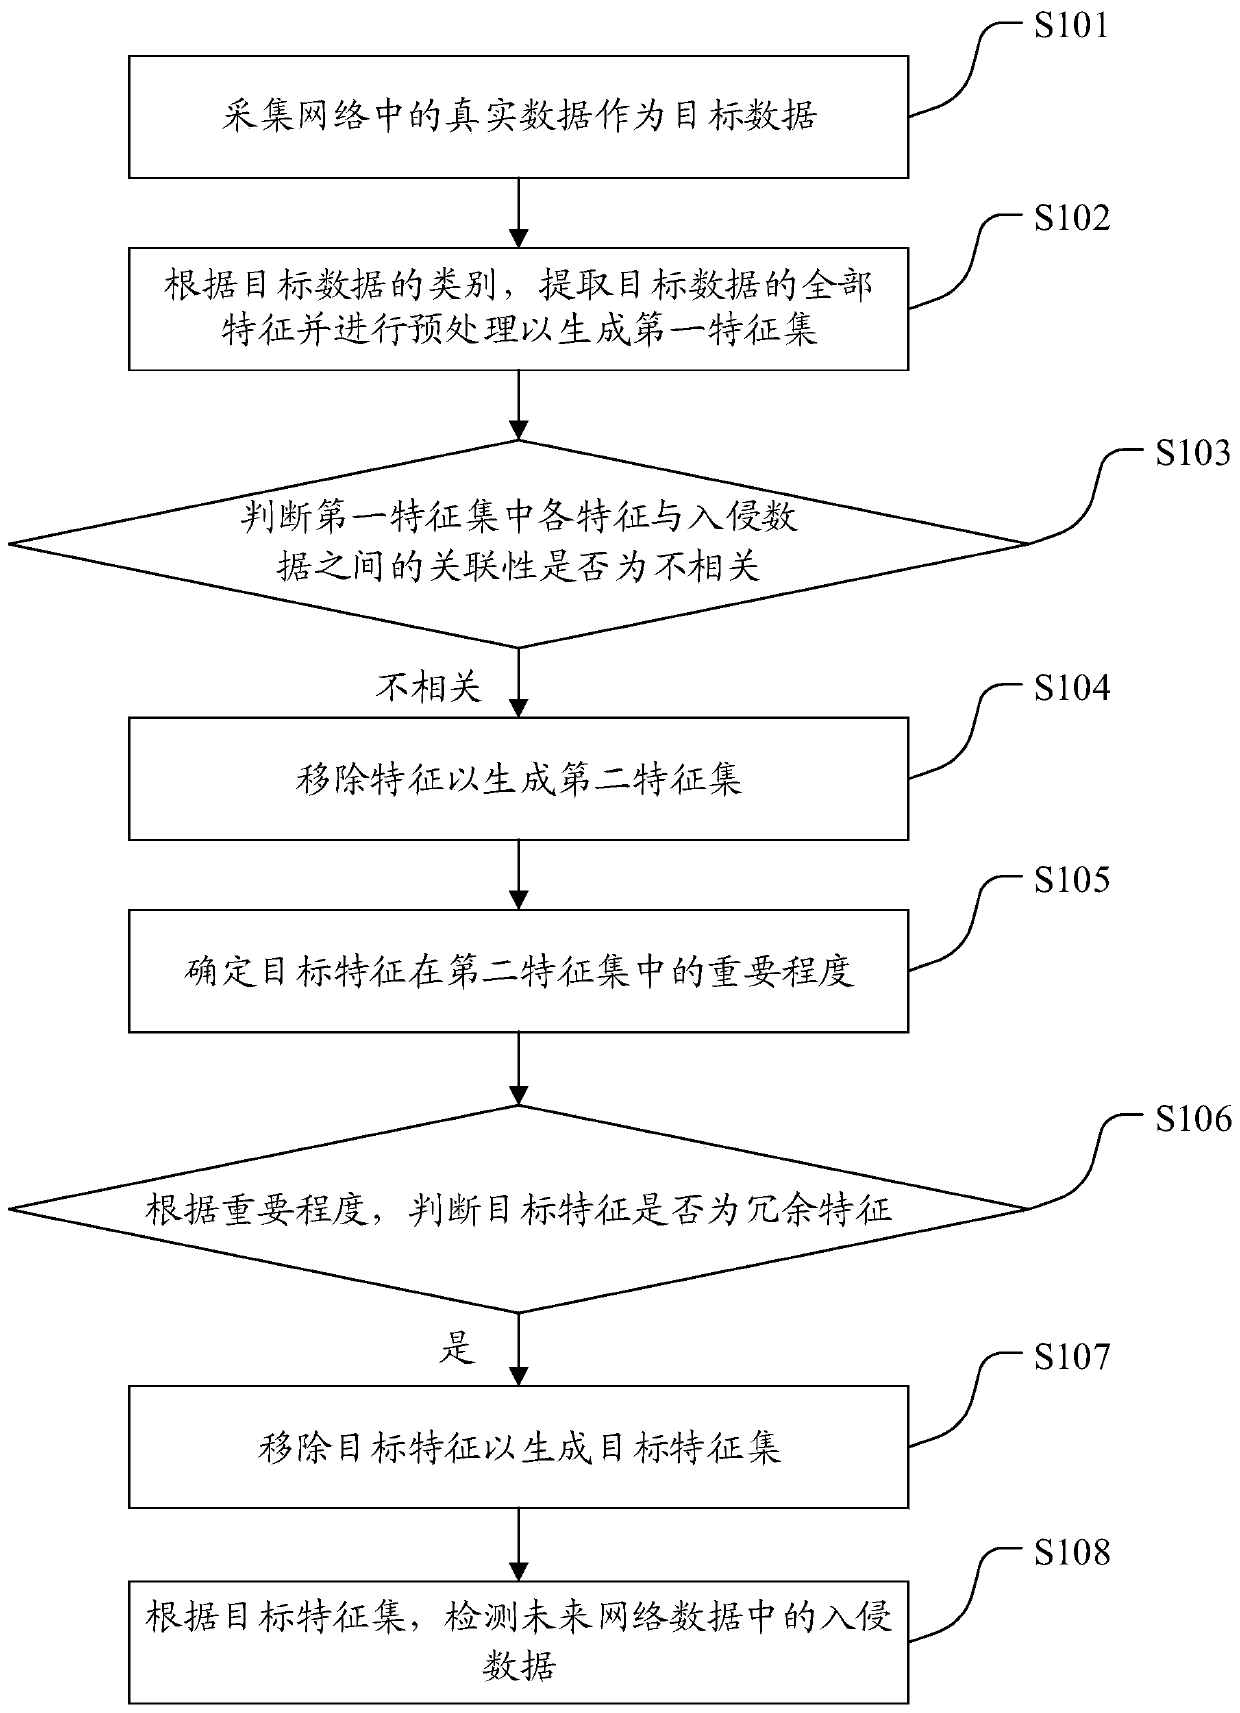 Network intrusion data detection method and device, equipment and medium